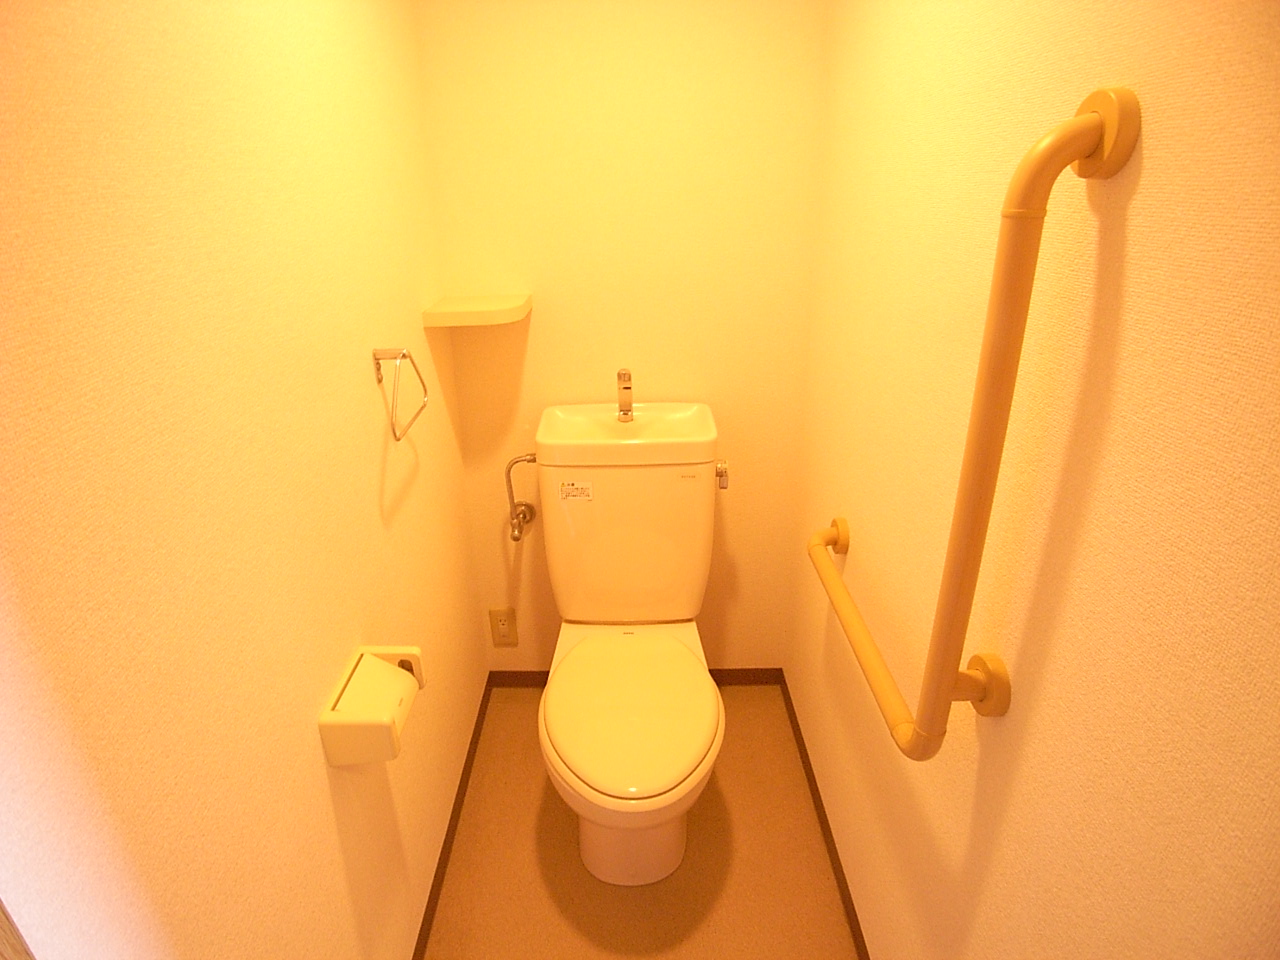 Toilet. With a shelf in the corner, It is with handrail on the wall